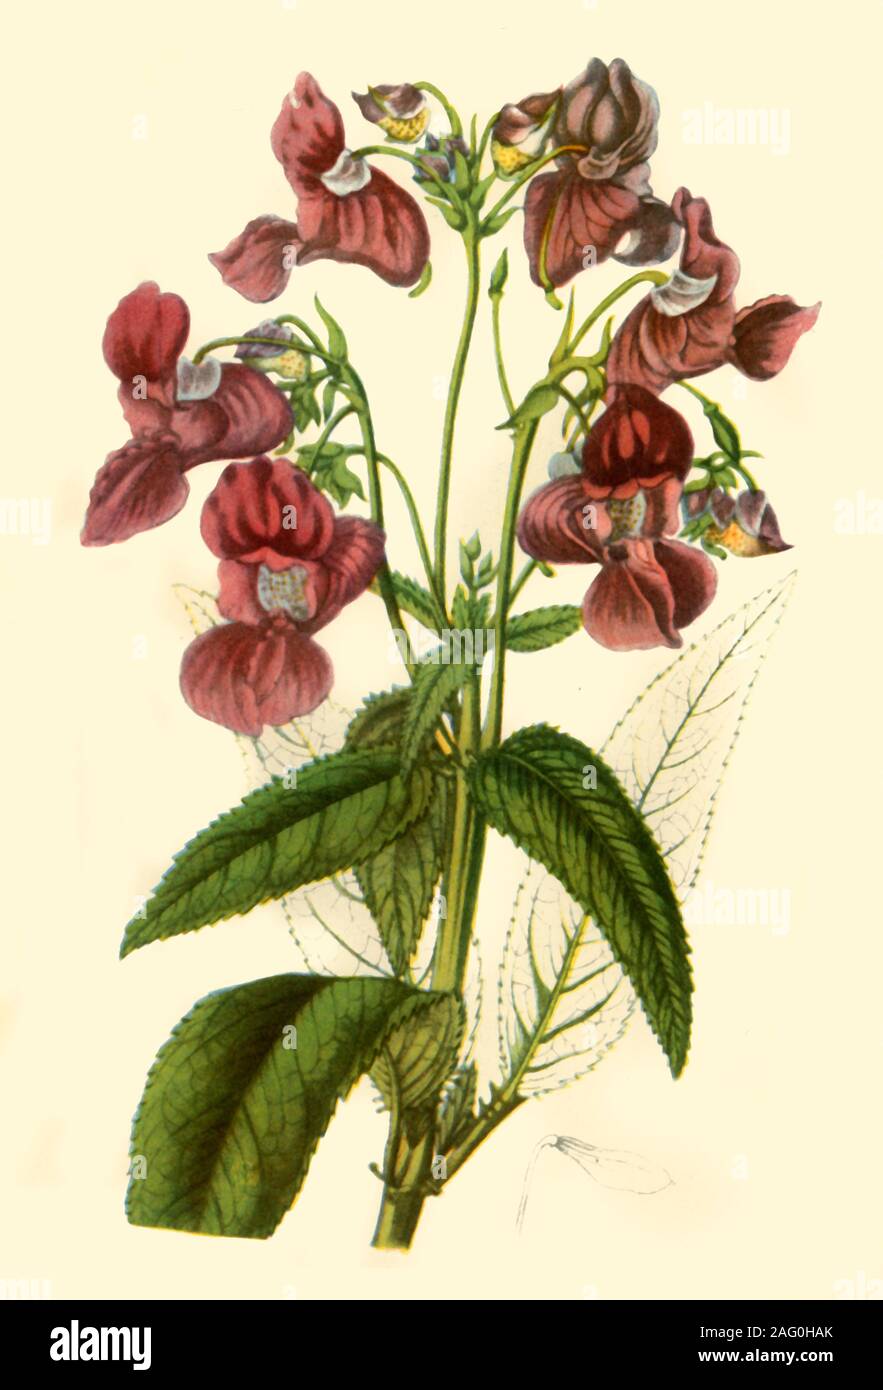 'Himalayan Balsam: Impatiens Glandulifera', 1840, (1944). Botanical illustration from &quot;Edwards's Botanical Register&quot; edited by John Lindley. Published in &quot;Wild Flowers in Britain&quot;, by Geoffrey Grigson. [Collins, London, 1944] Stock Photo